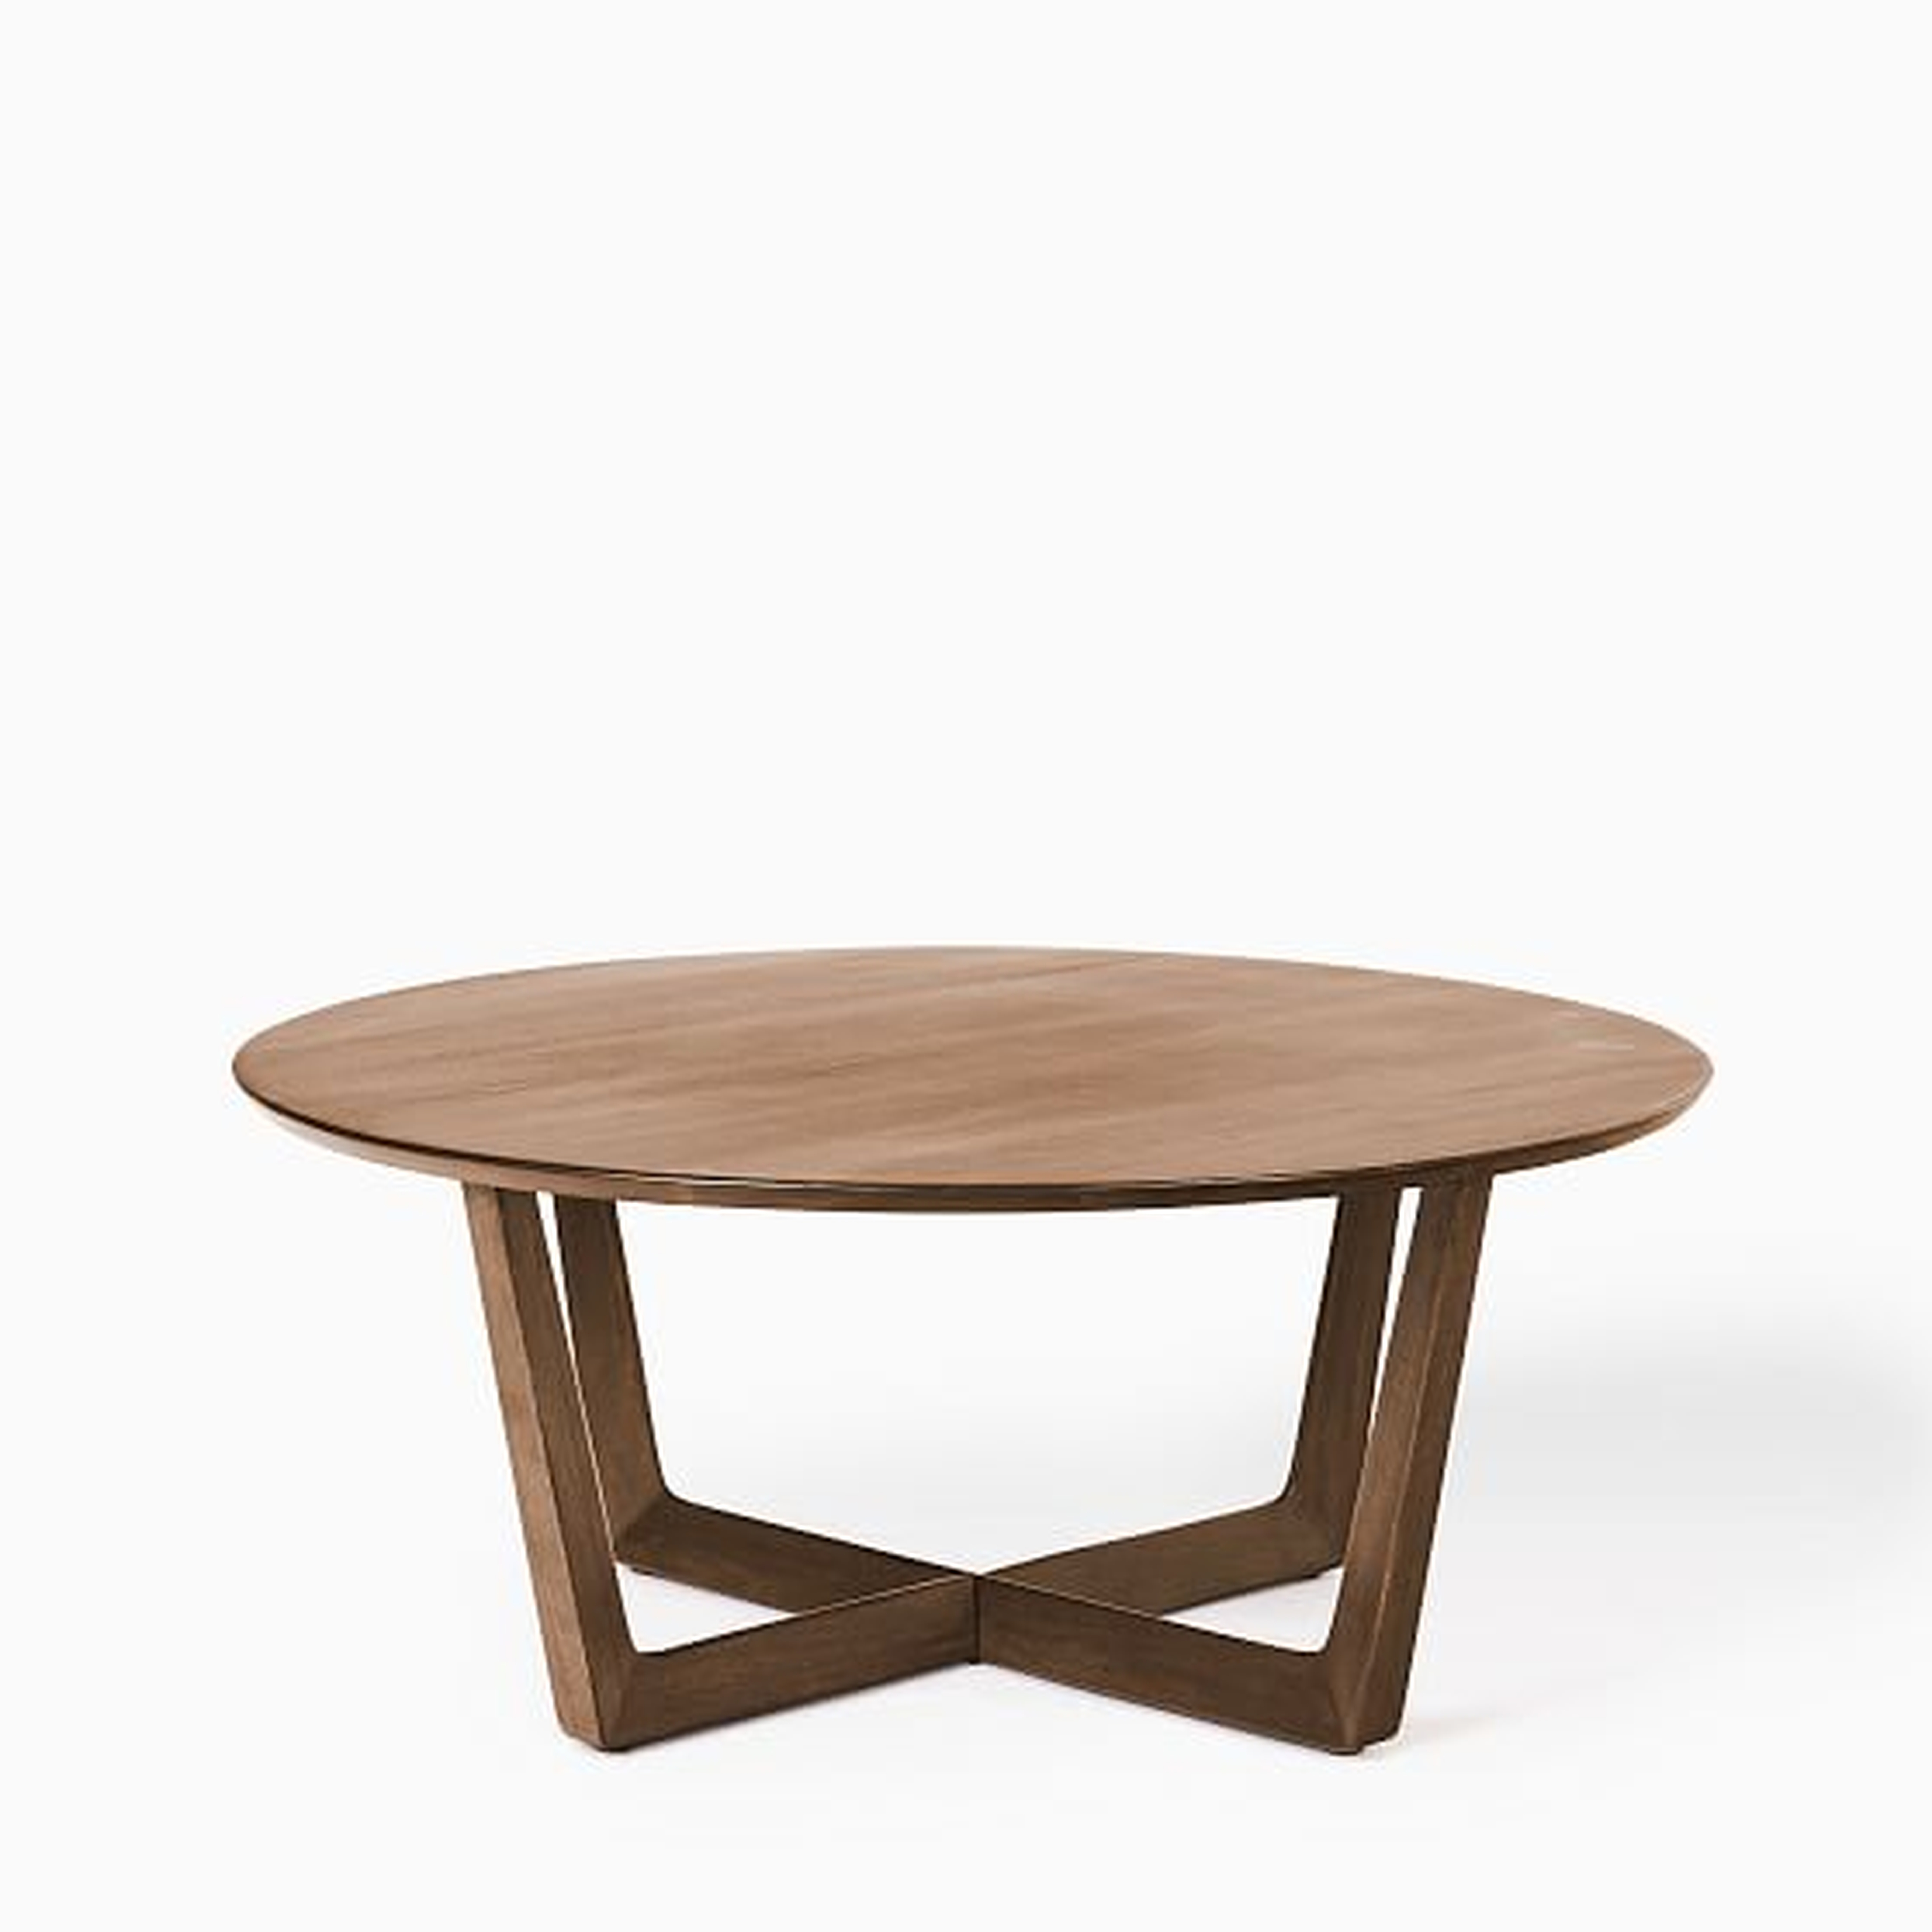 WE Stowe Collection Round Coffee Table, 36", Cool Walnut - West Elm